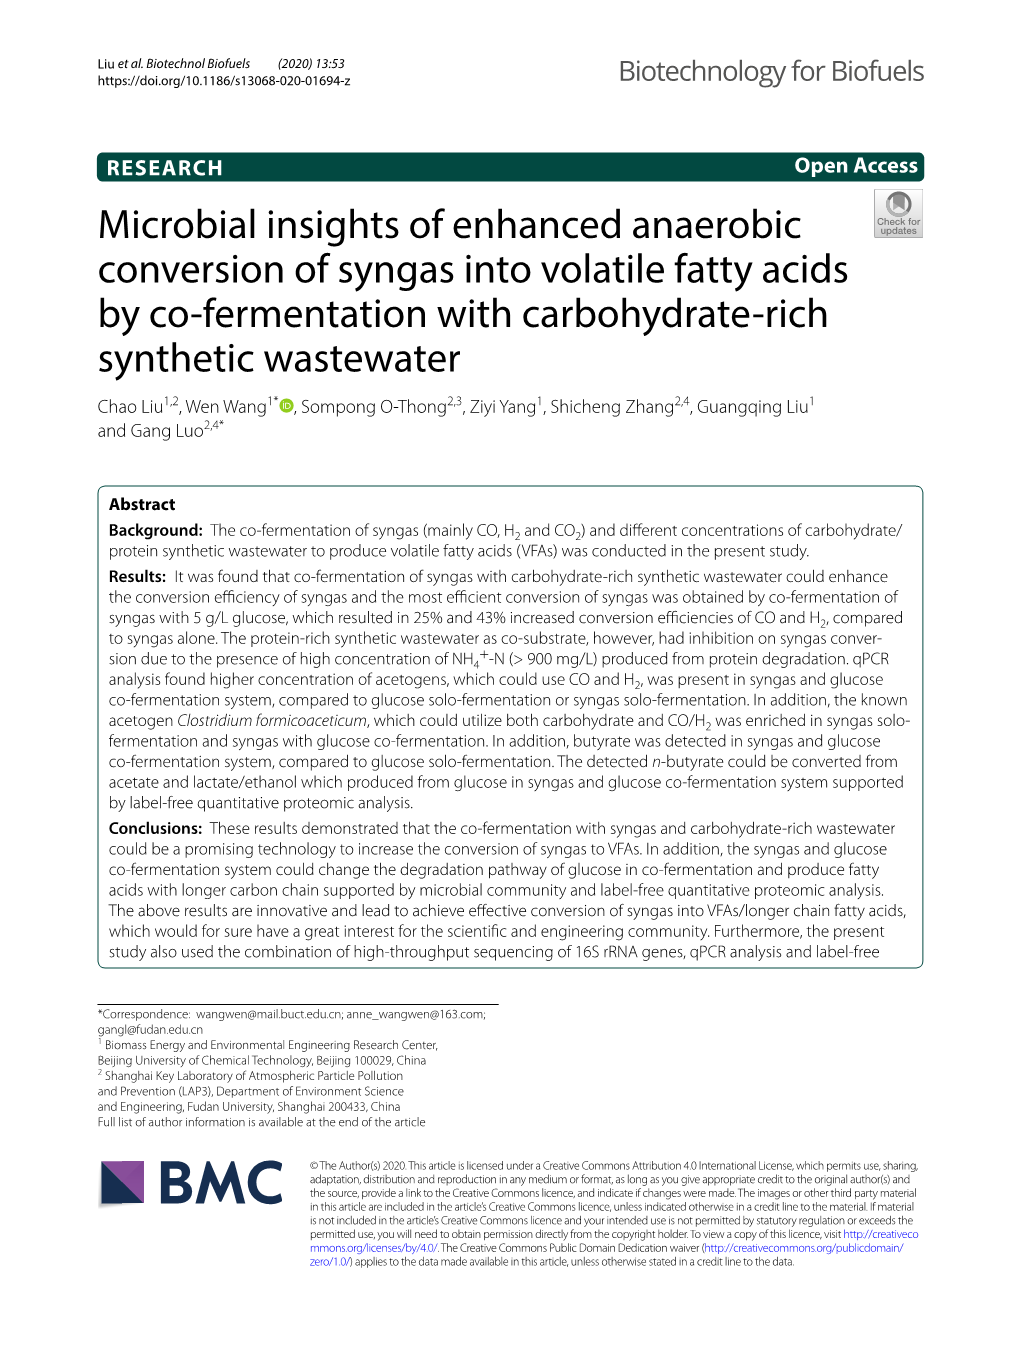 Microbial Insights of Enhanced Anaerobic Conversion of Syngas